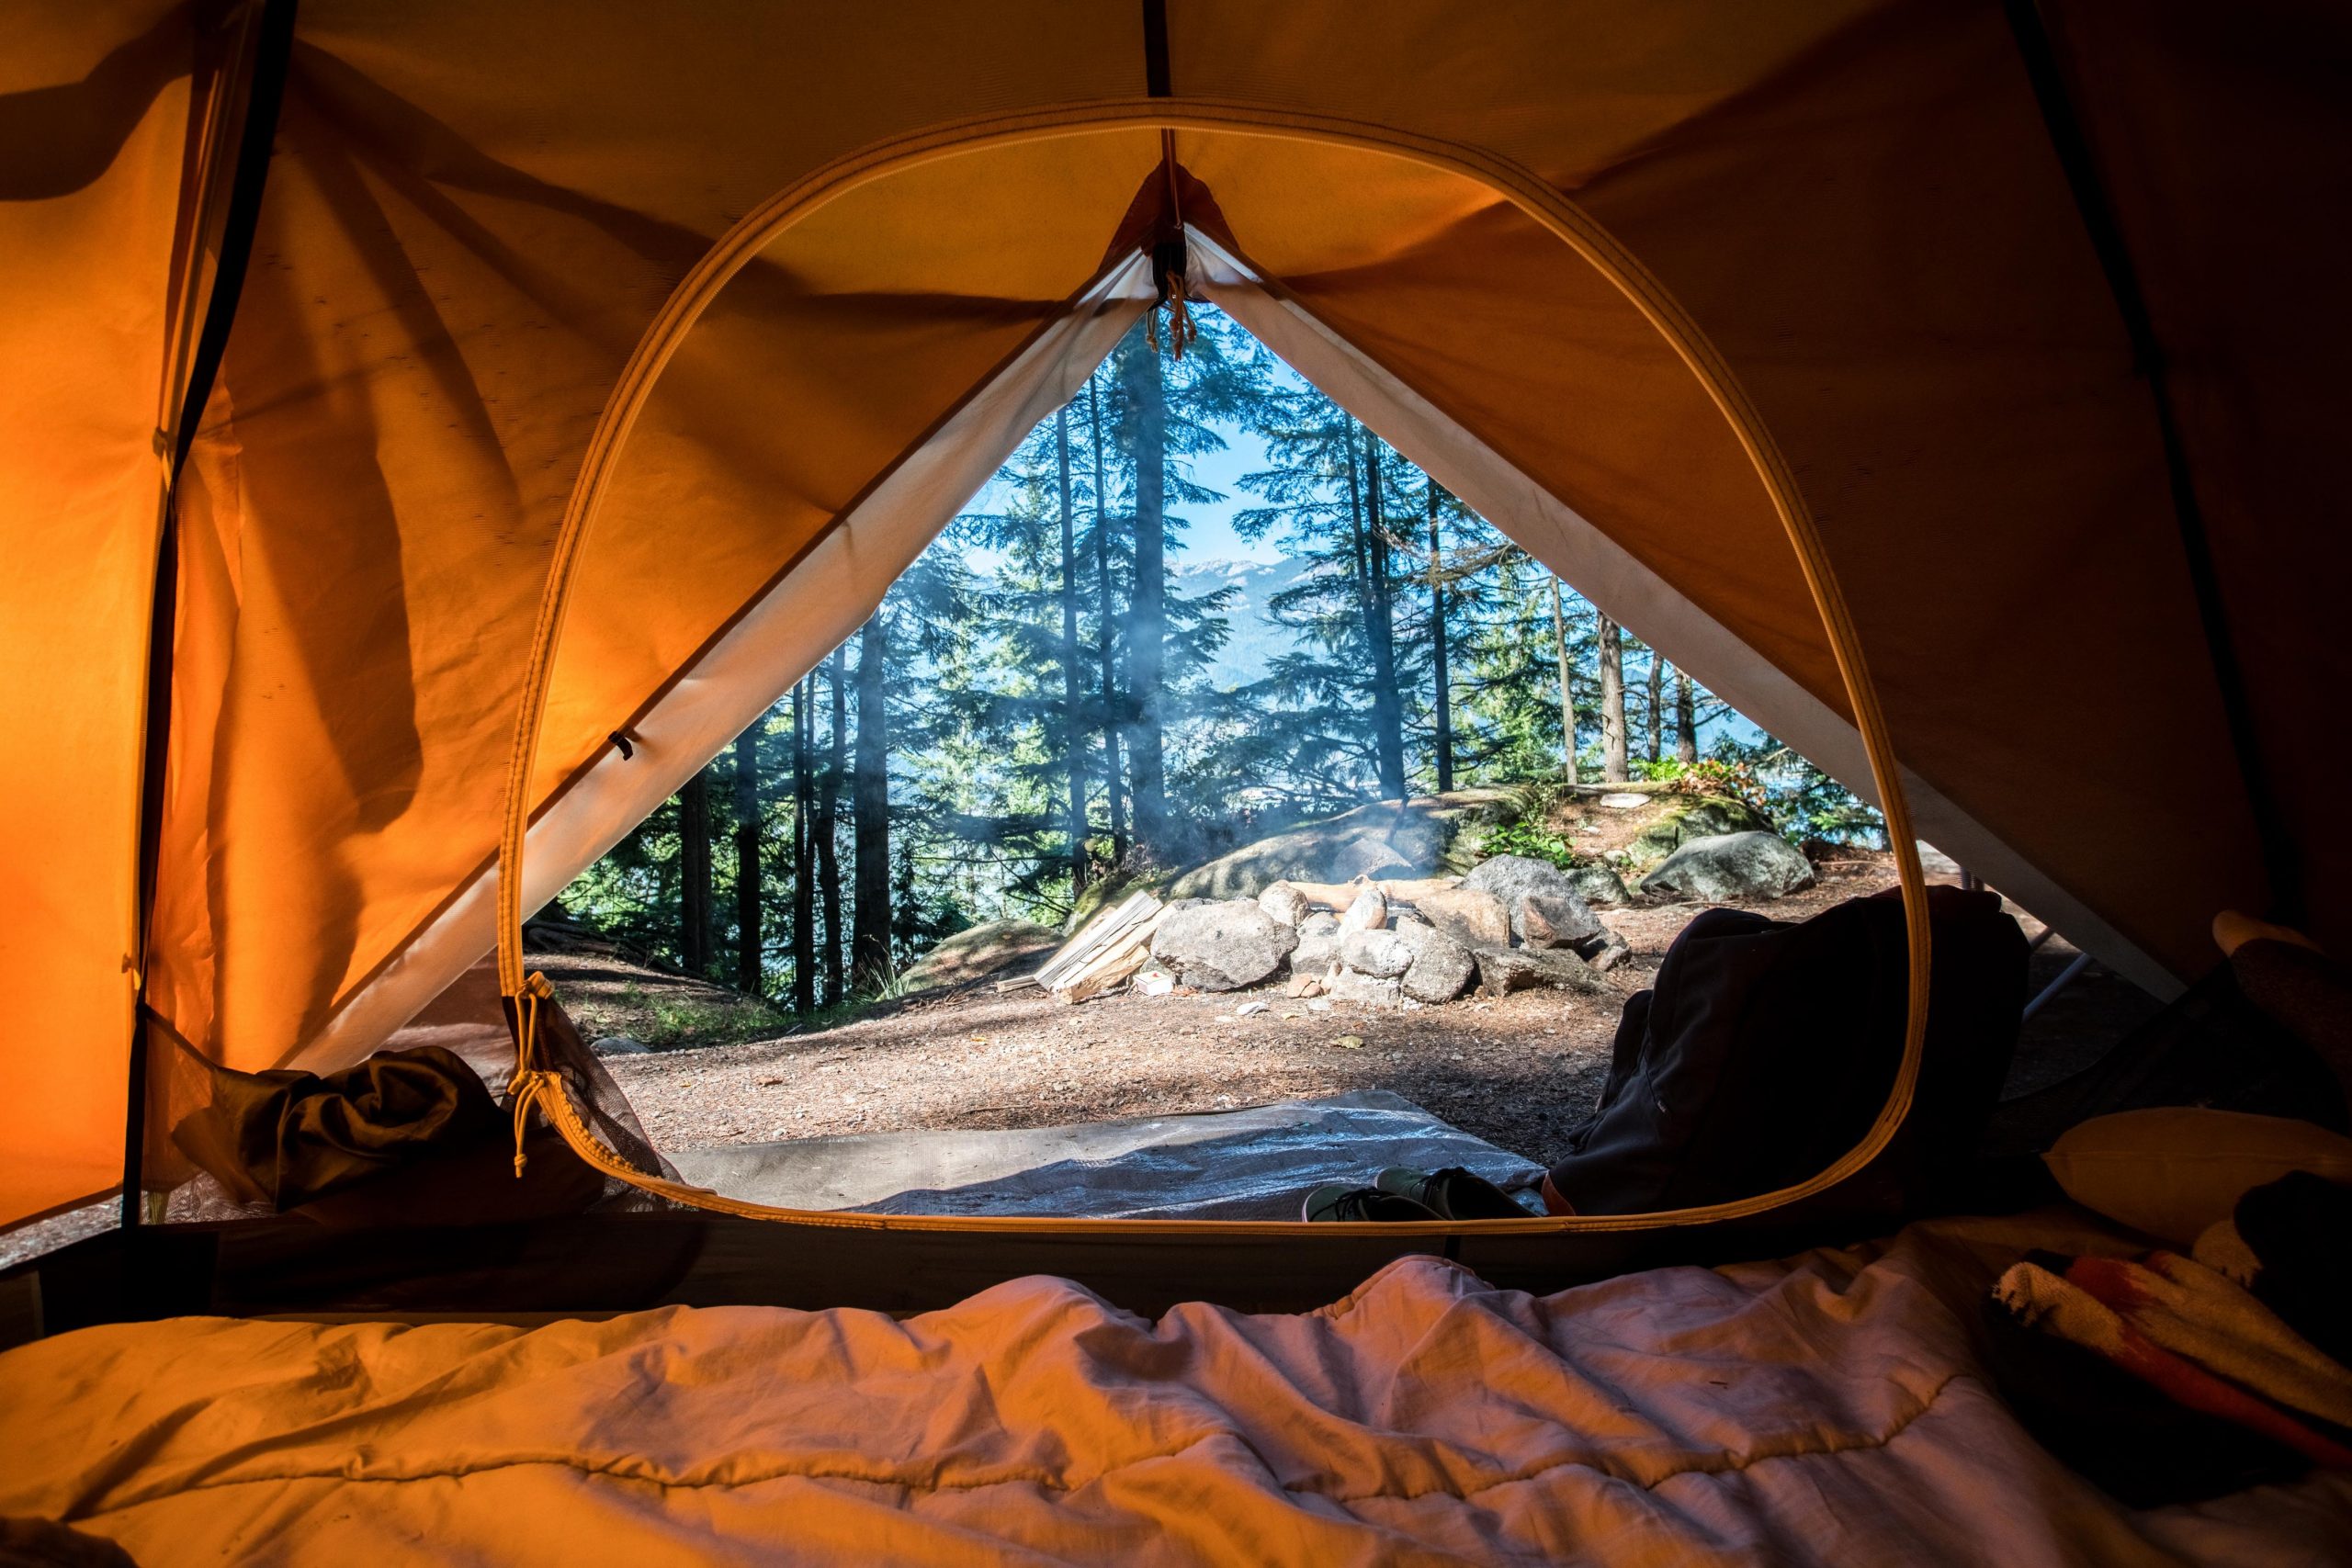 Camping Gear: Essential Equipment for an Unforgettable Outdoor Adventure